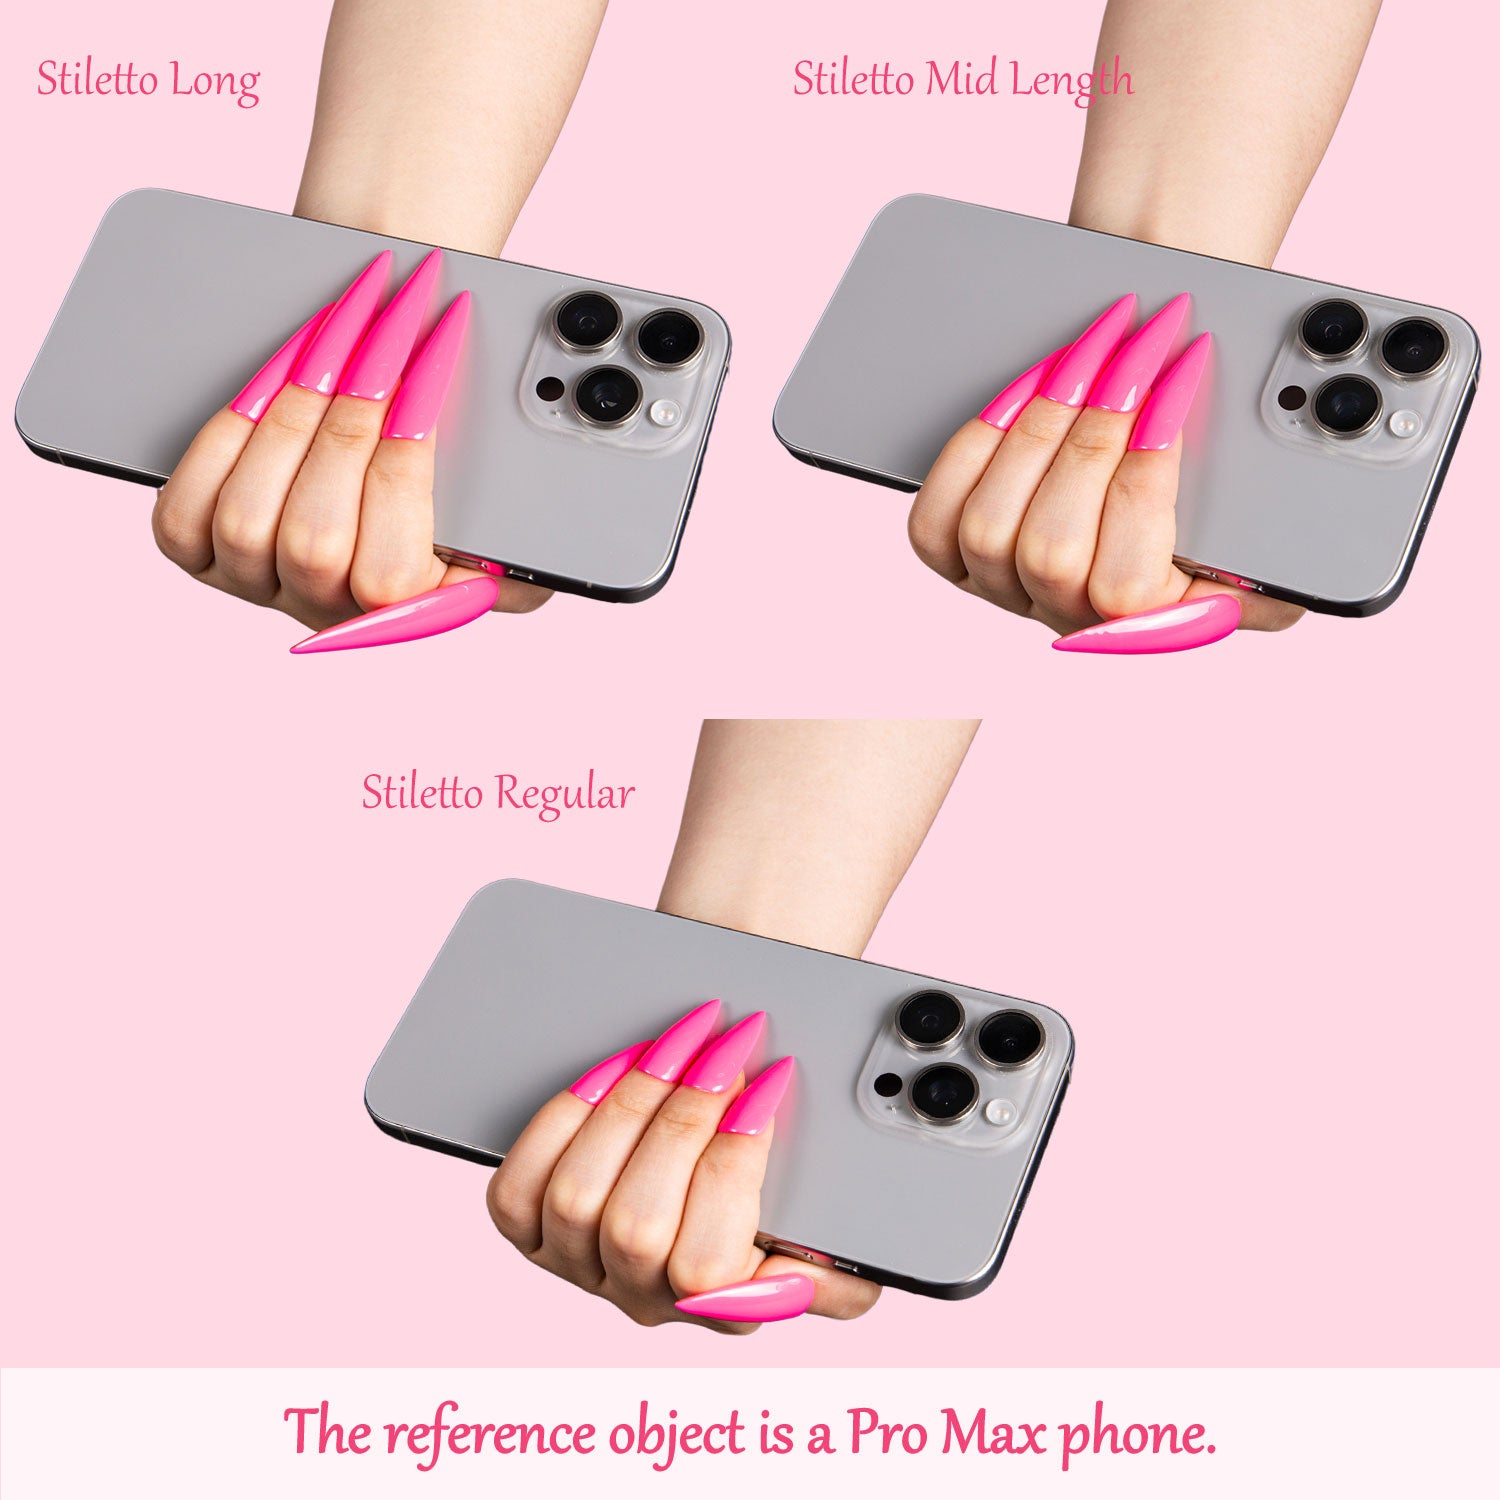 Comparison of three stiletto press-on nail lengths, Long, Mid Length, and Regular, with a Pro Max phone for scale reference